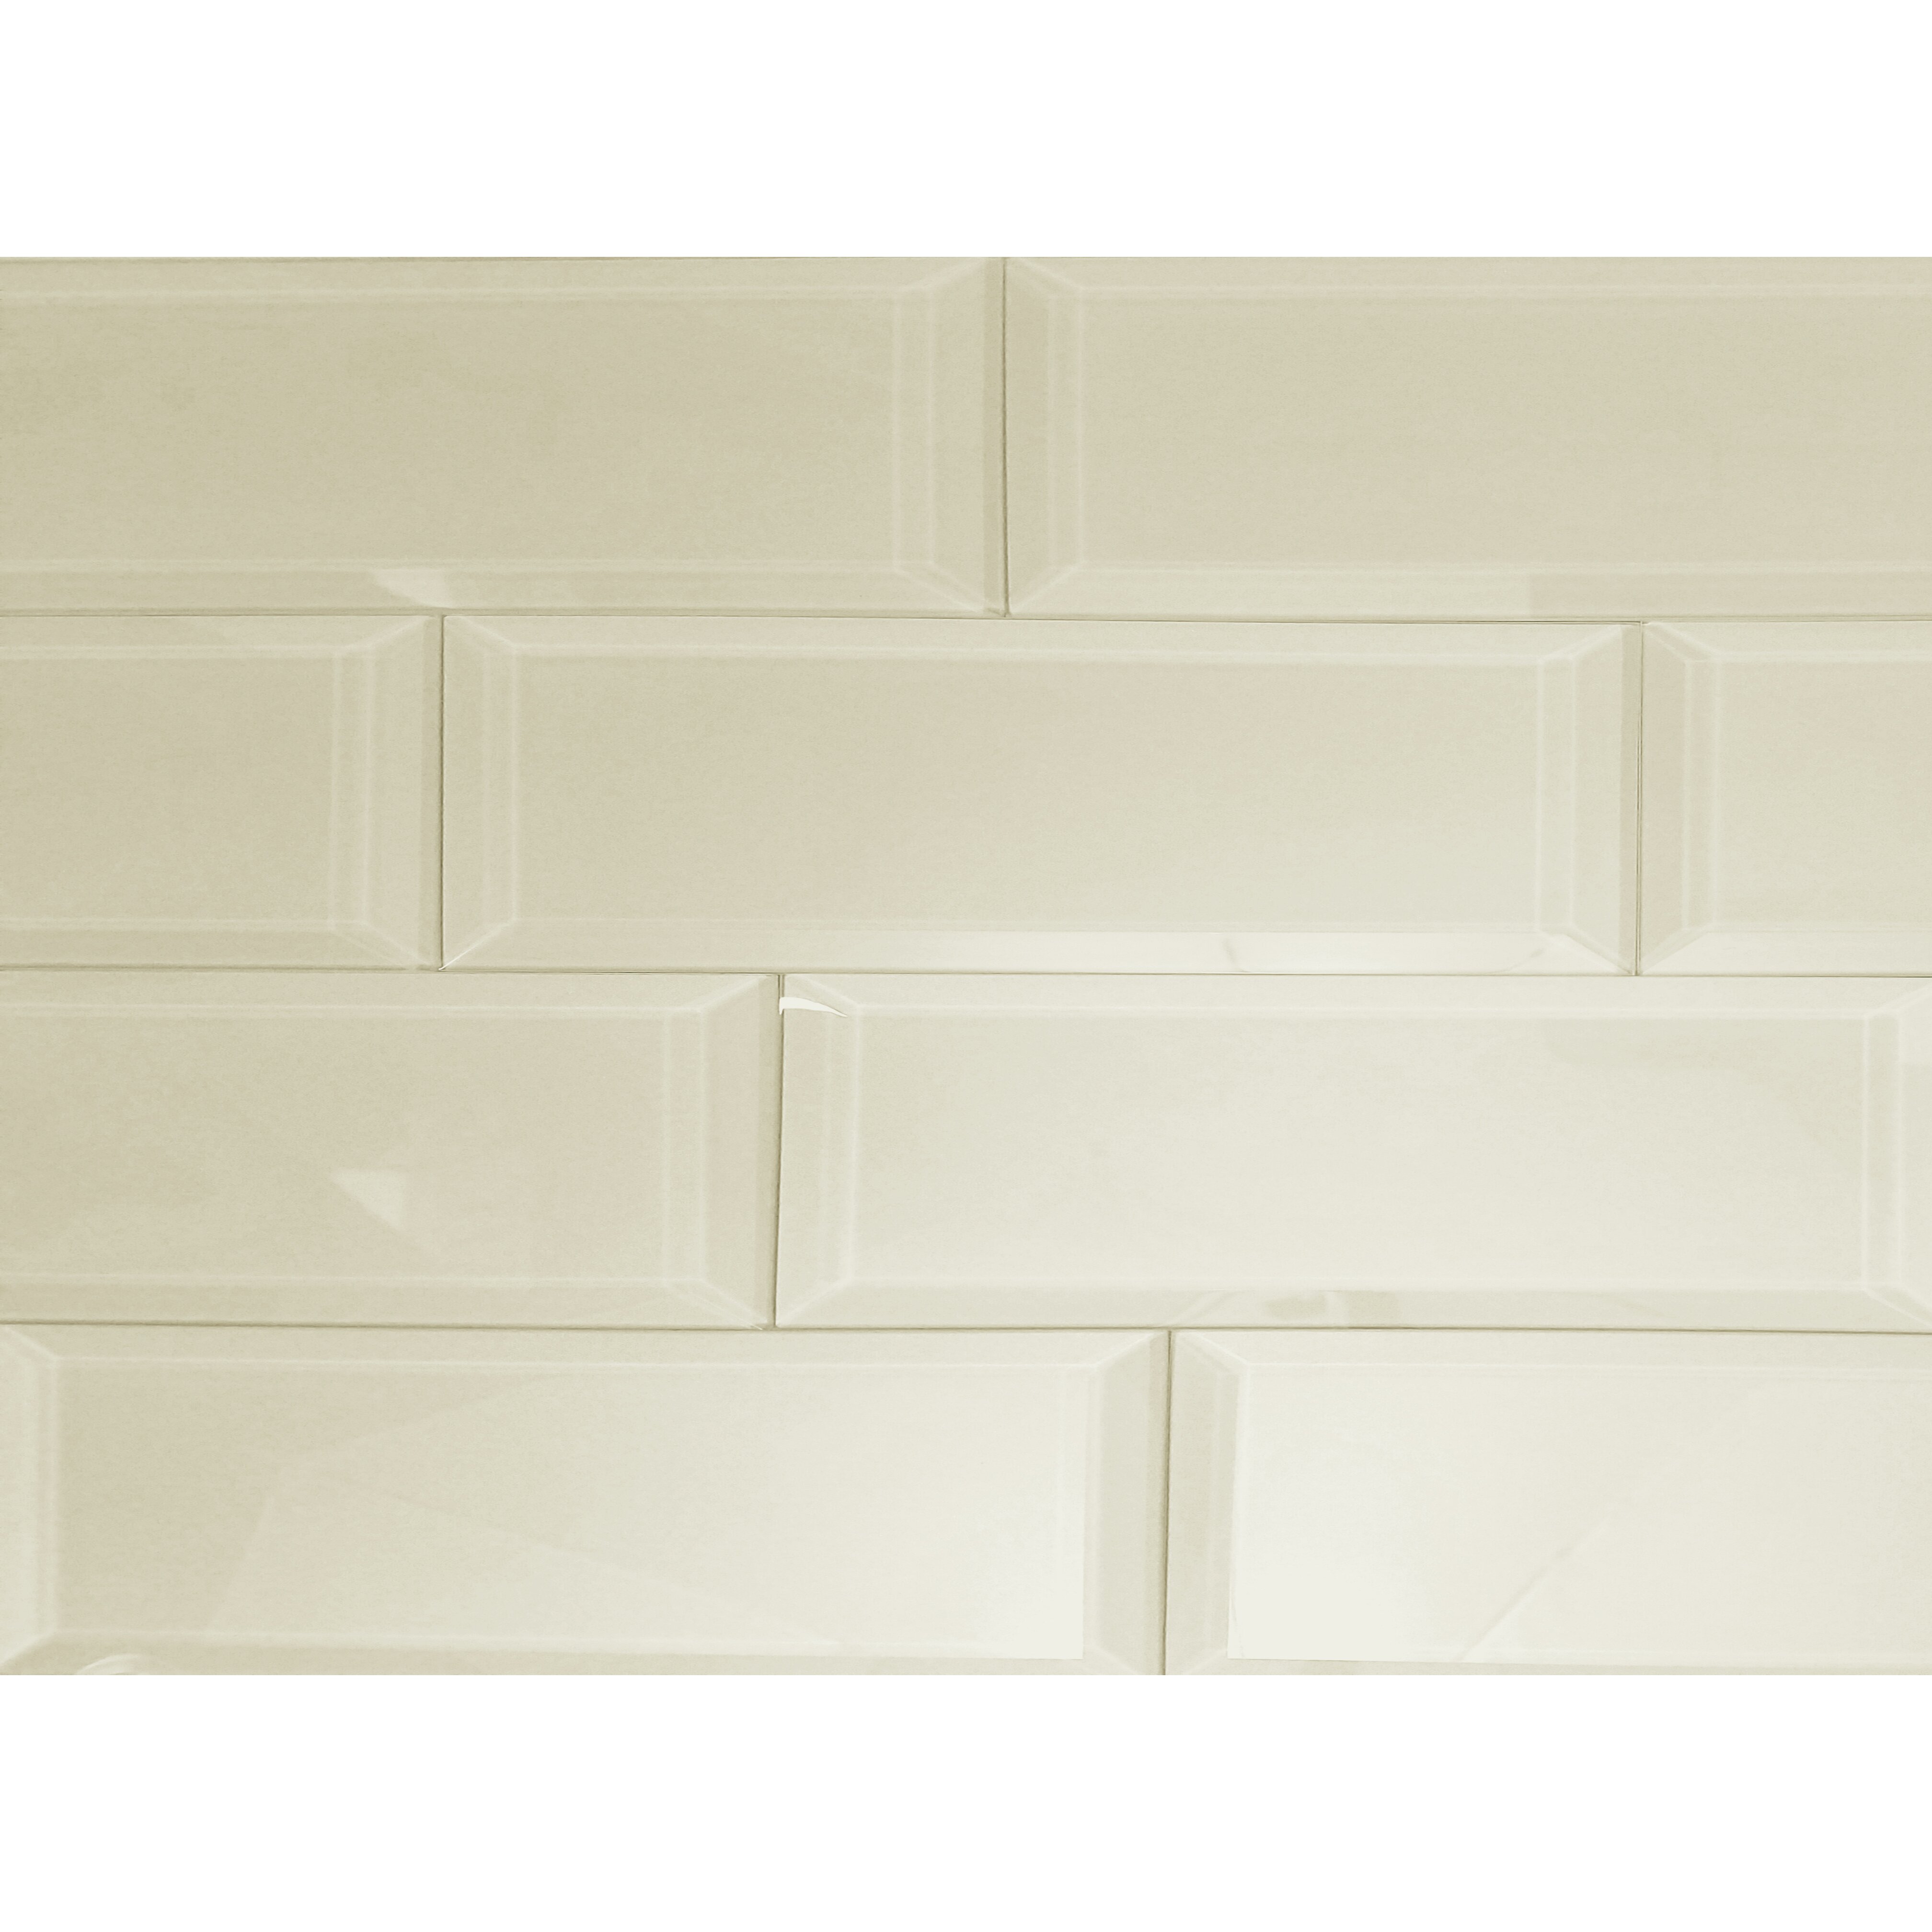 Abolos Frosted Elegance 3" x 12" Glass Subway Tile in Glossy Creme